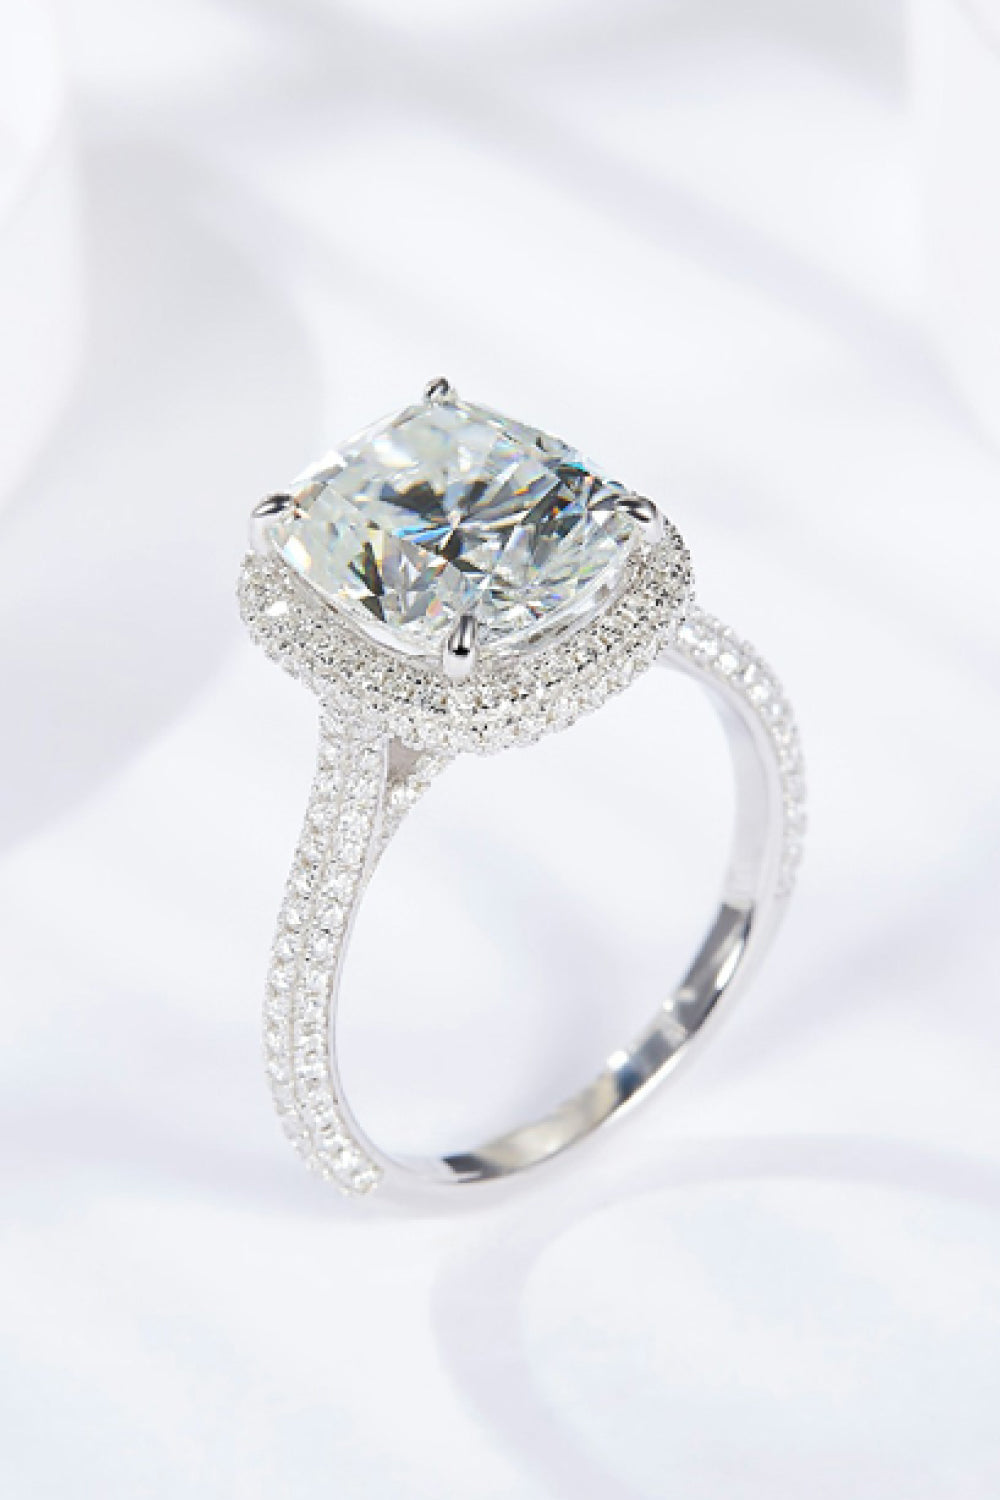 6 Carat Cushion-Cut Moissanite Halo Ring (Platinum Over Pure Sterling Silver)